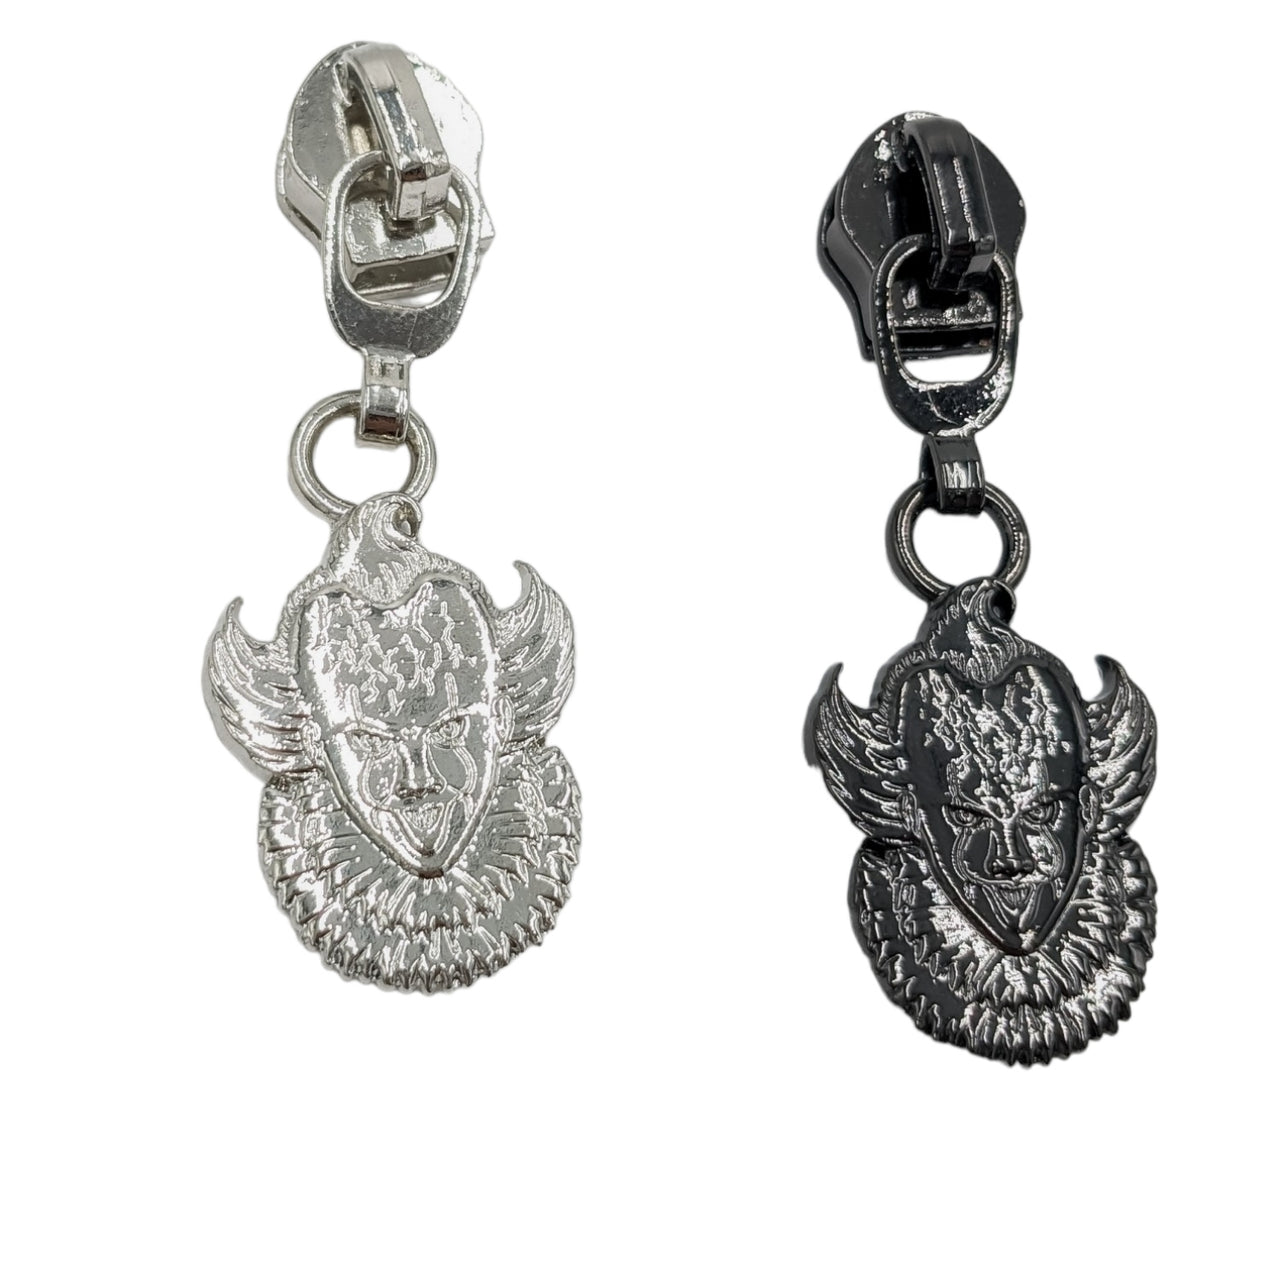 Pennywise Zipper Pull - Pack of 5